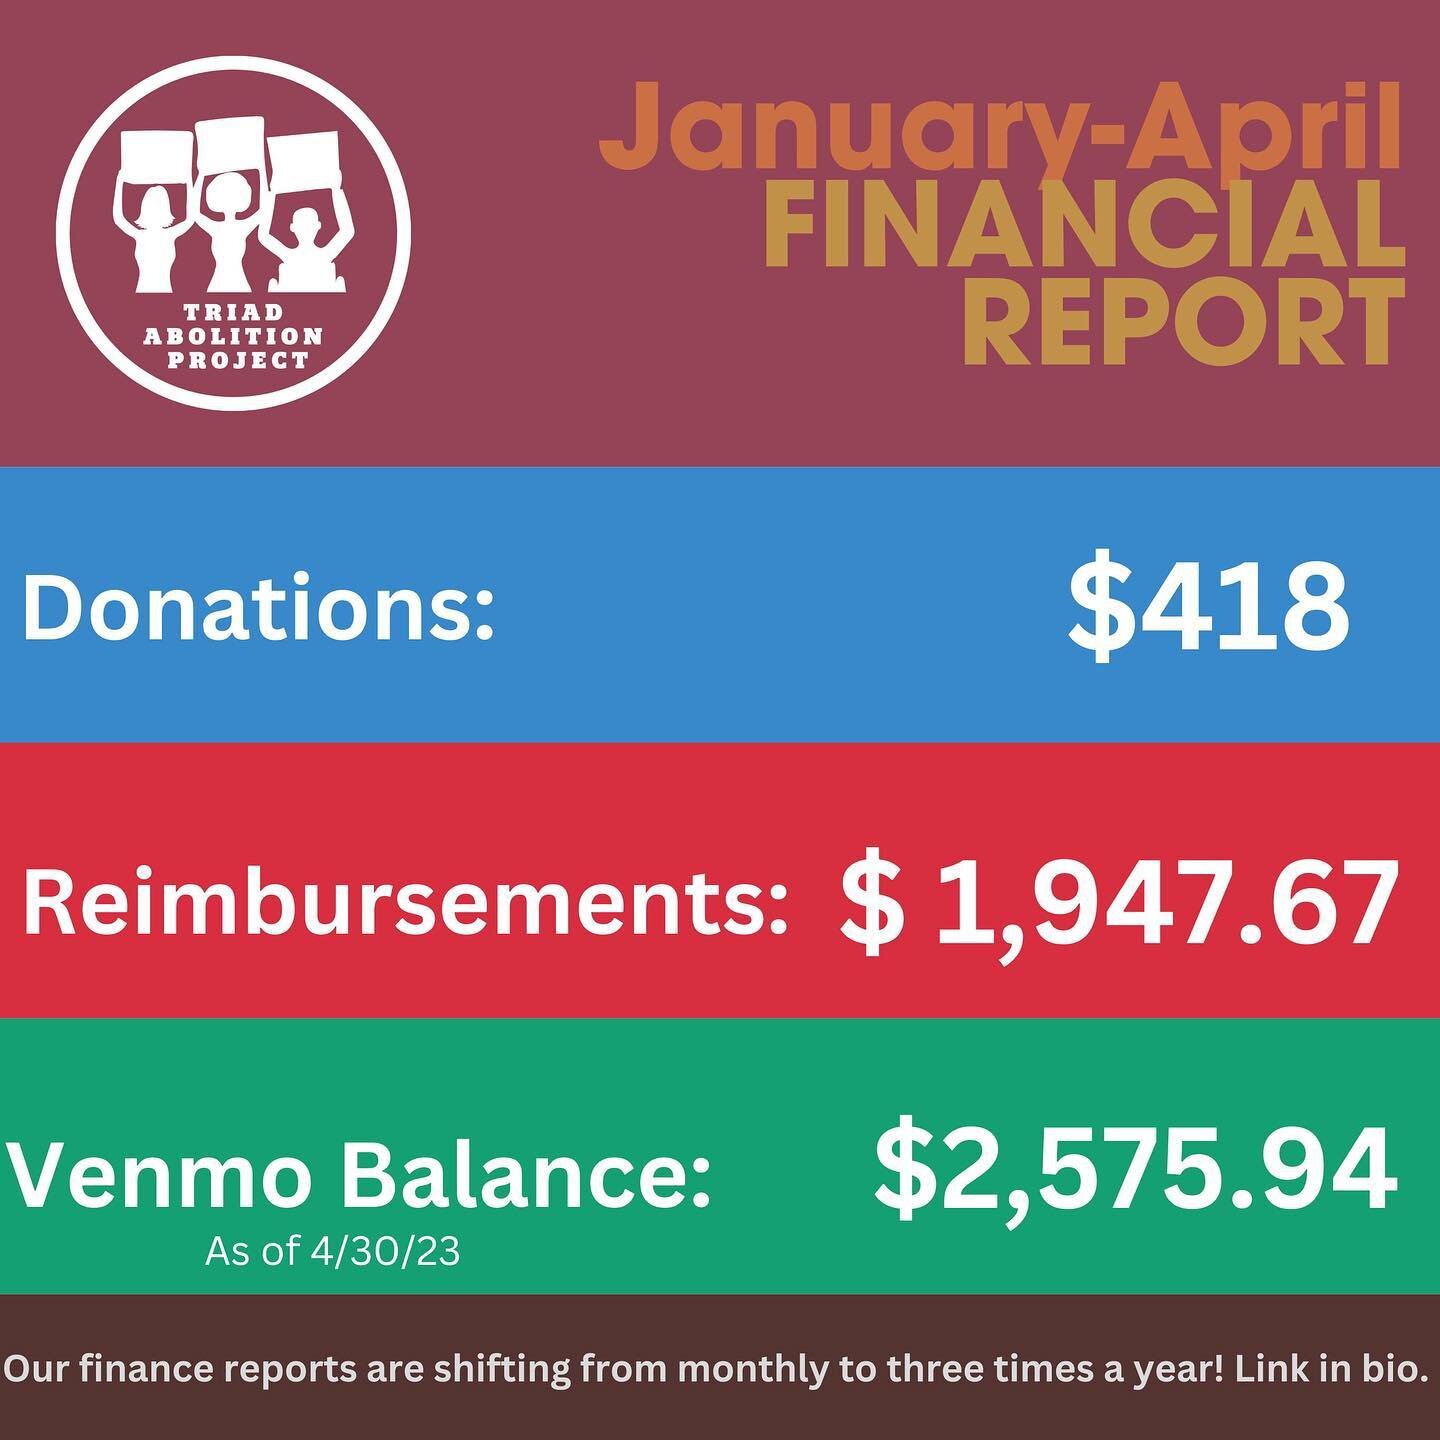 Our finance reports are shifting from monthly to three times a year! Check out the full report at bit.ly/TAP23FinanceReport. The link is case sensitive and is also in our bio.